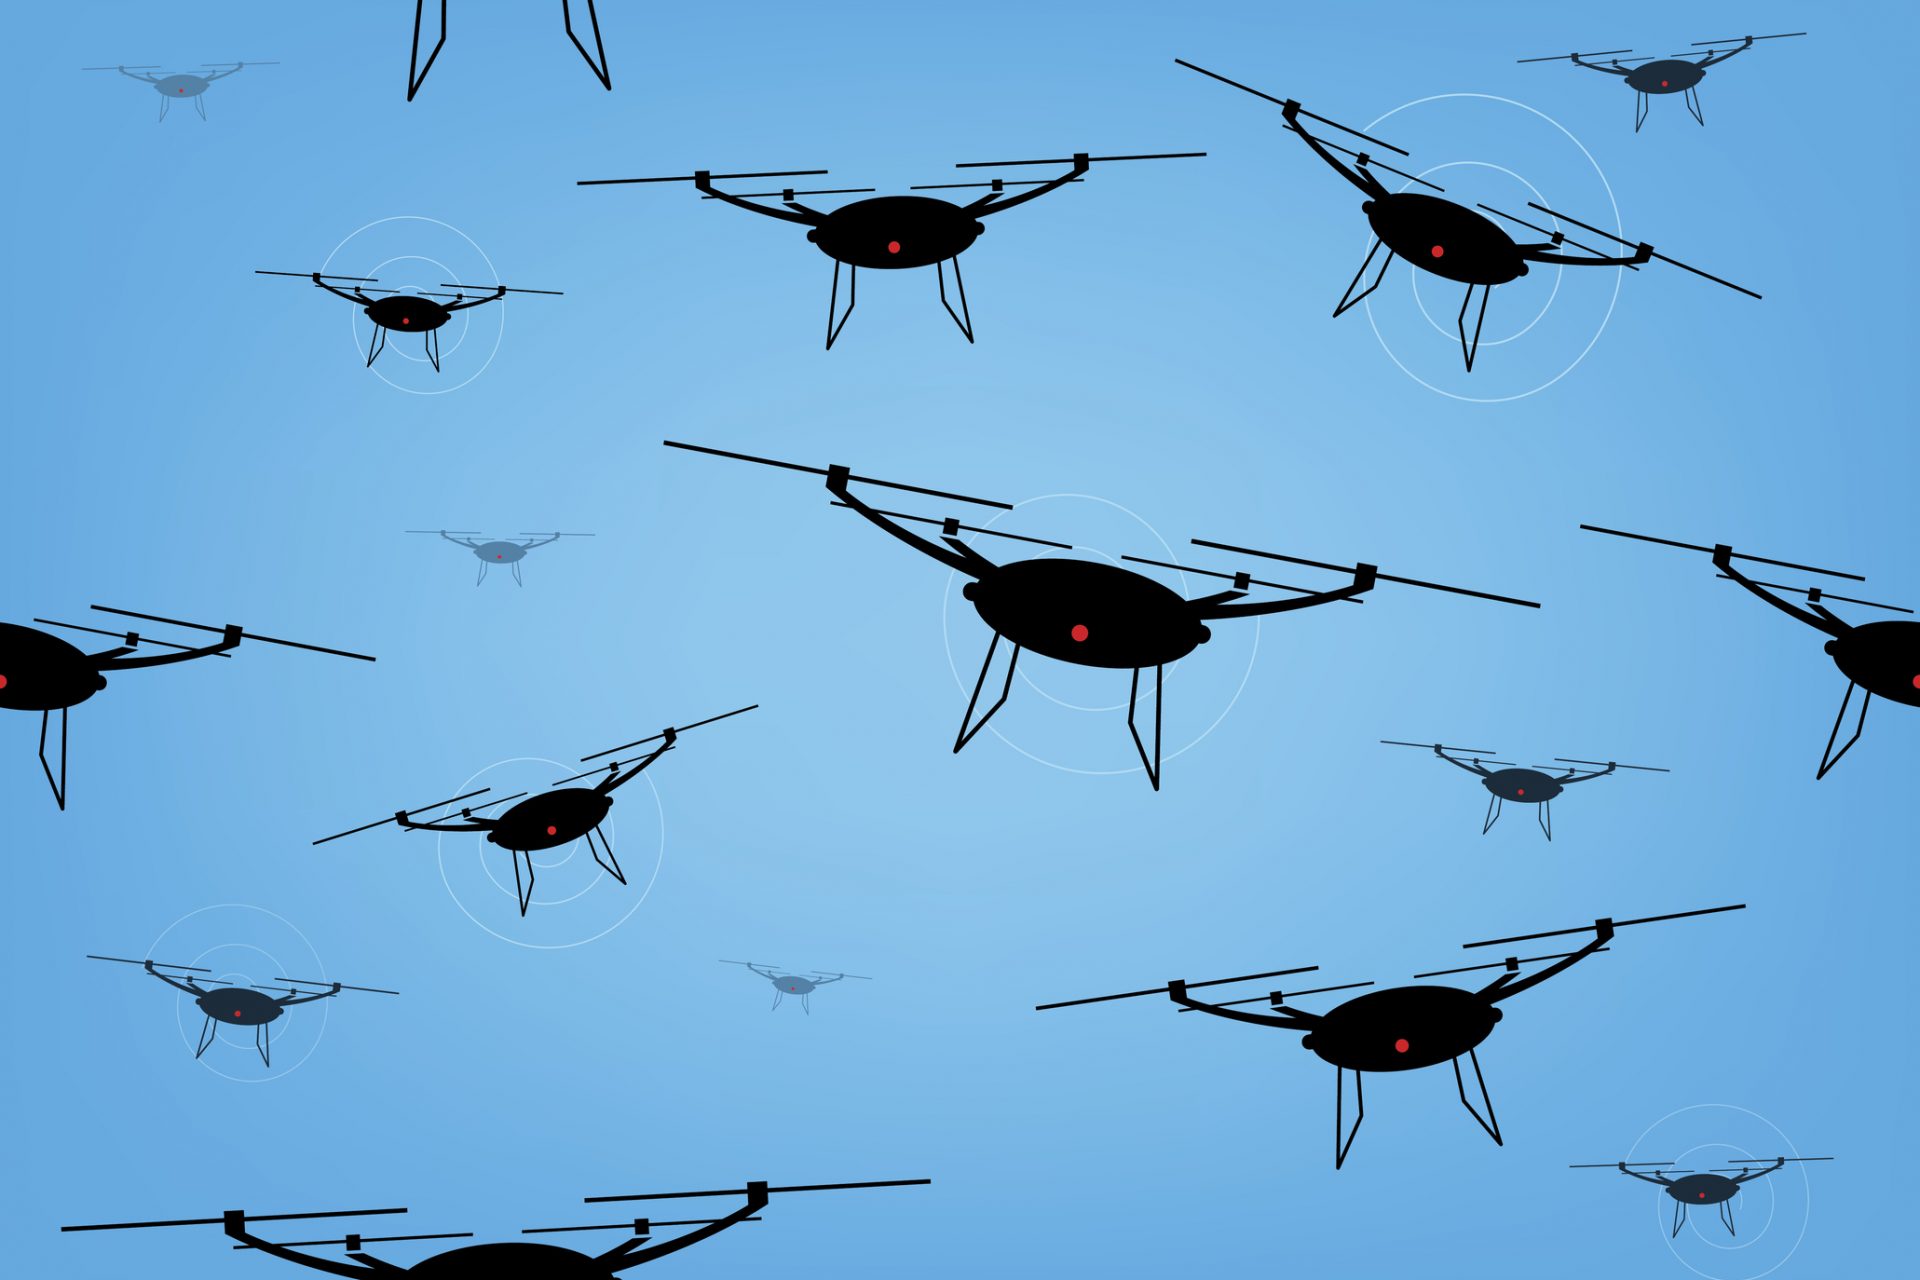 Drone swarms could soon completely change warfare and the world